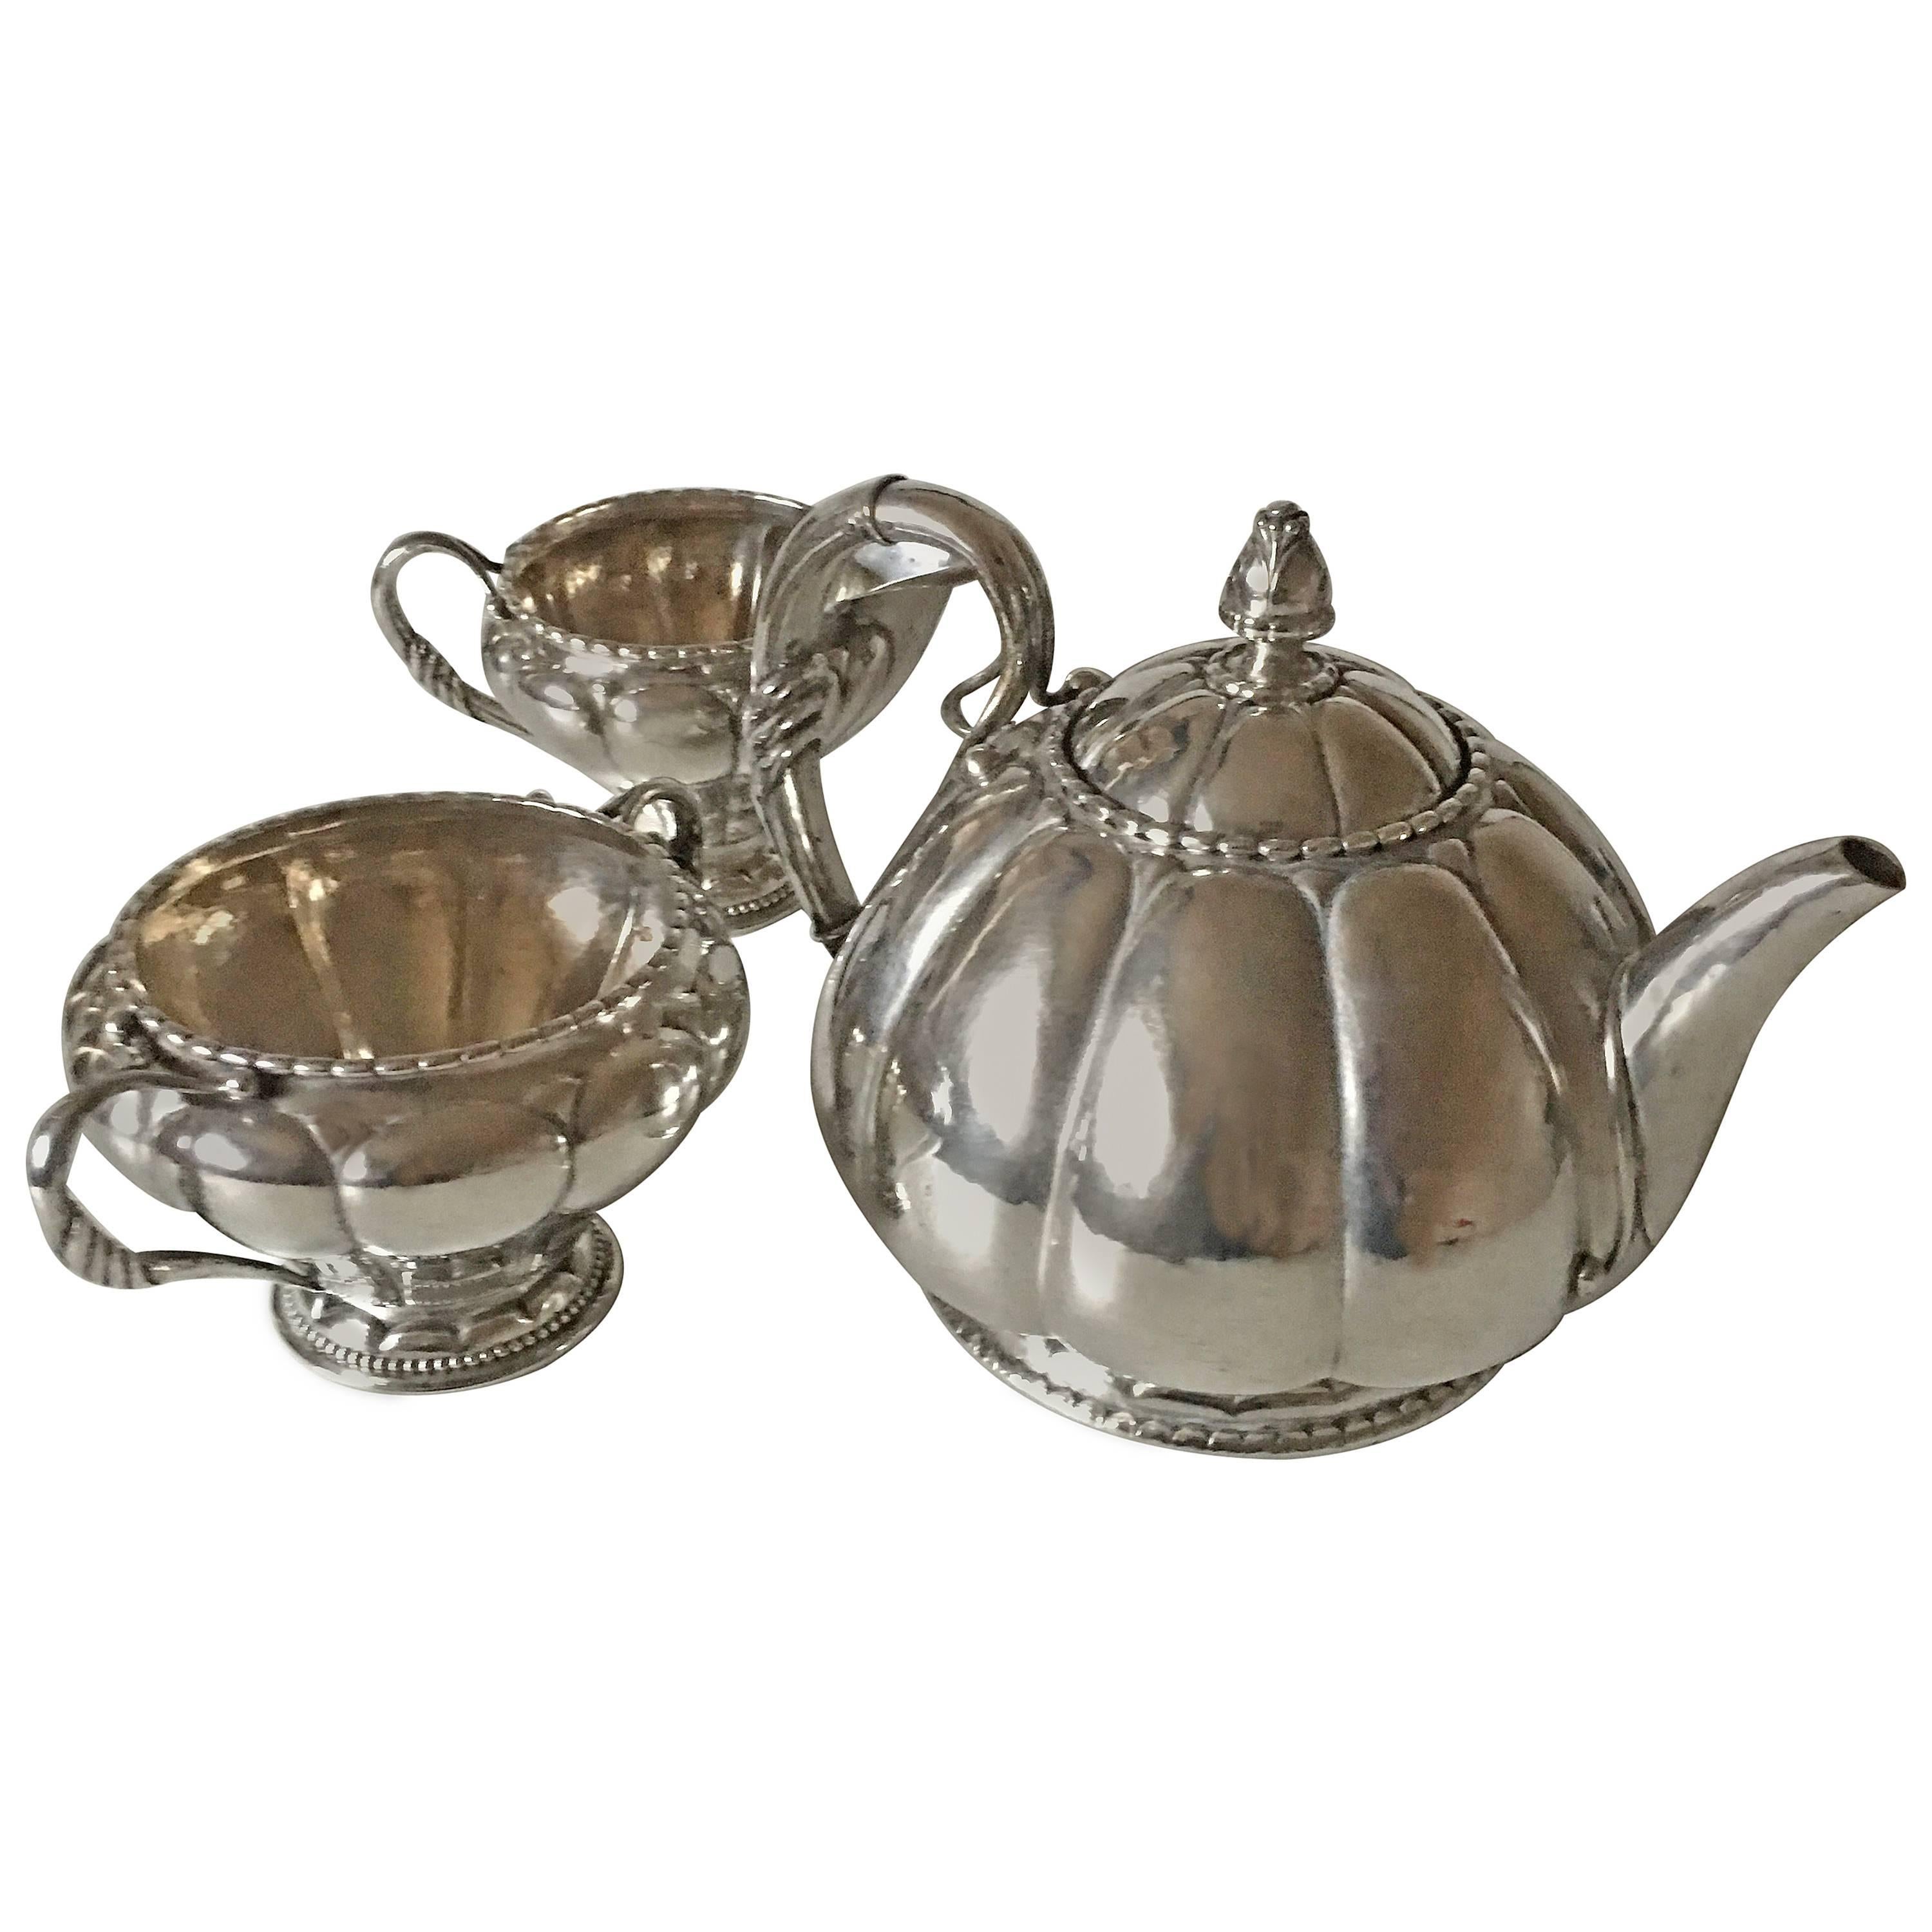 Georg Jensen Tea Set #26 in Silver with Early Marks from 1904-1908 For Sale